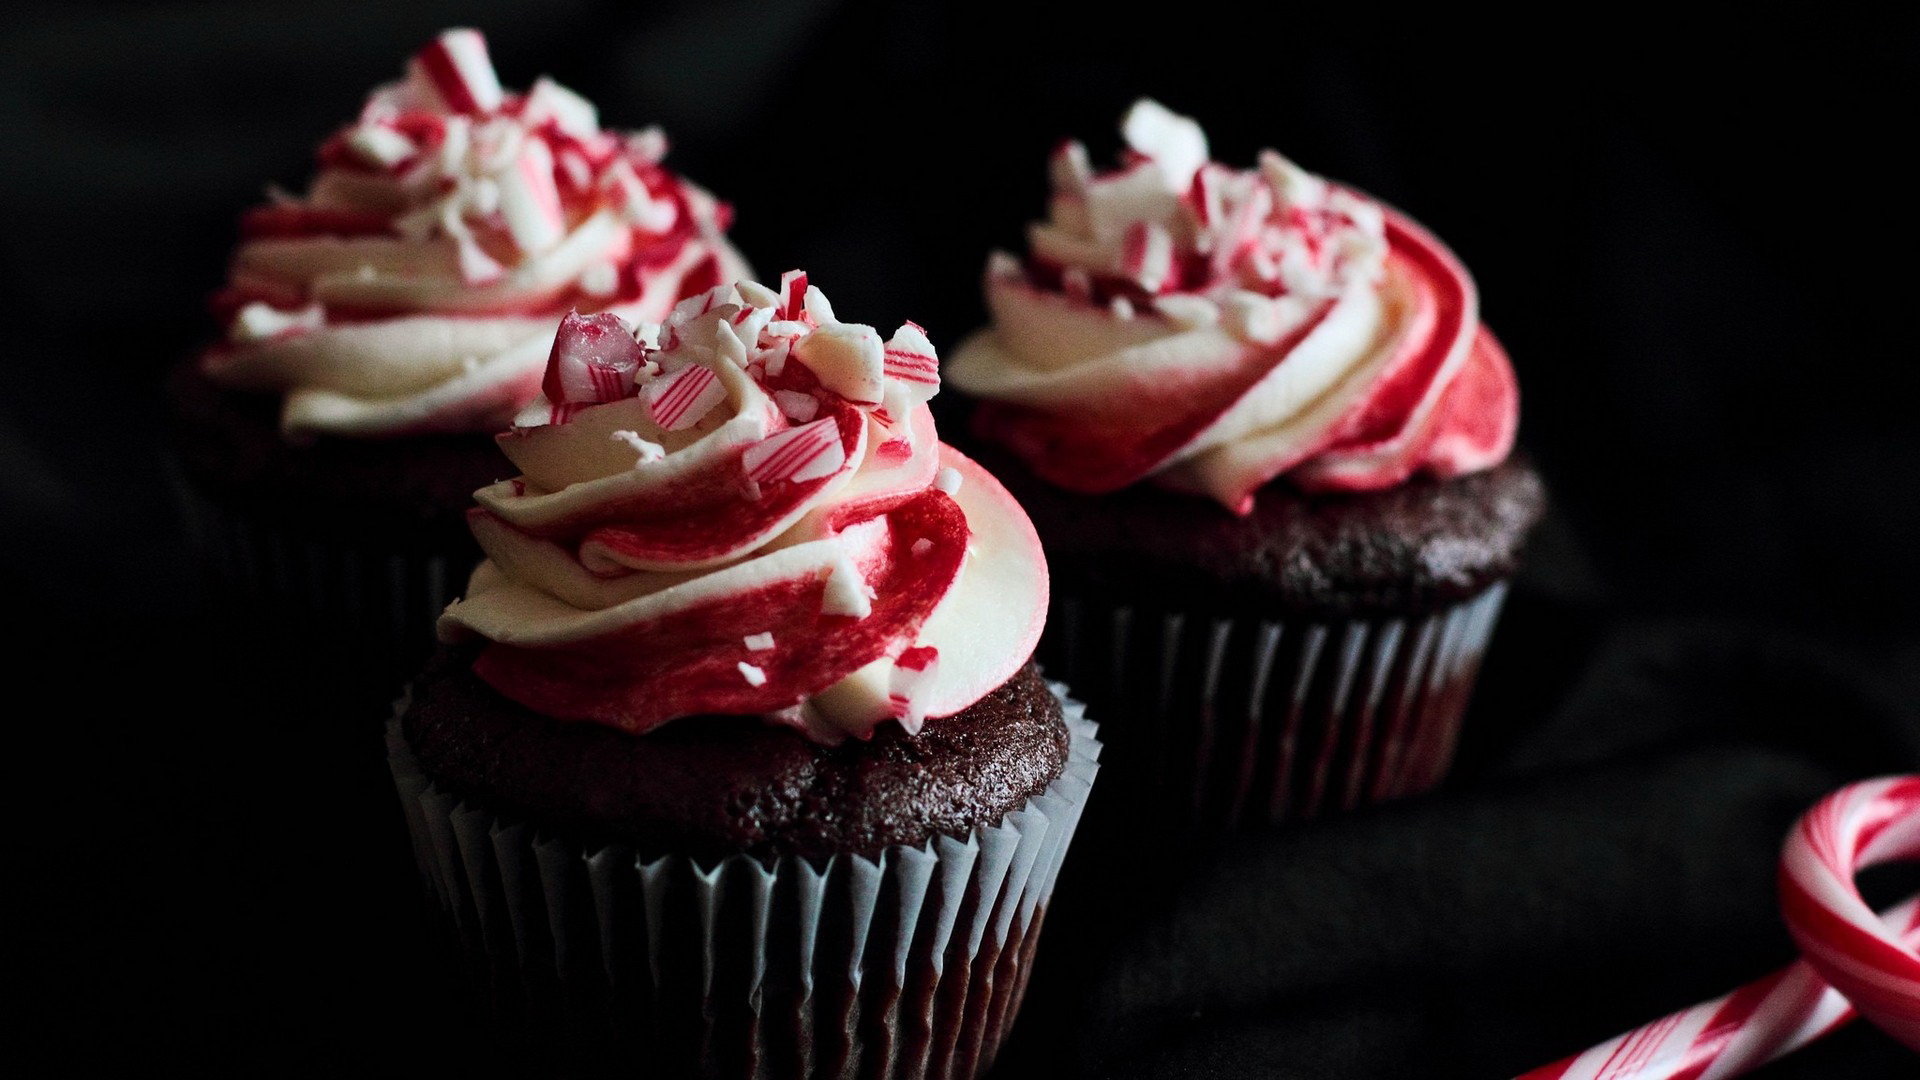 High Resolution Cupcake 1080p Background Id - Cupcake Images Hd - HD Wallpaper 